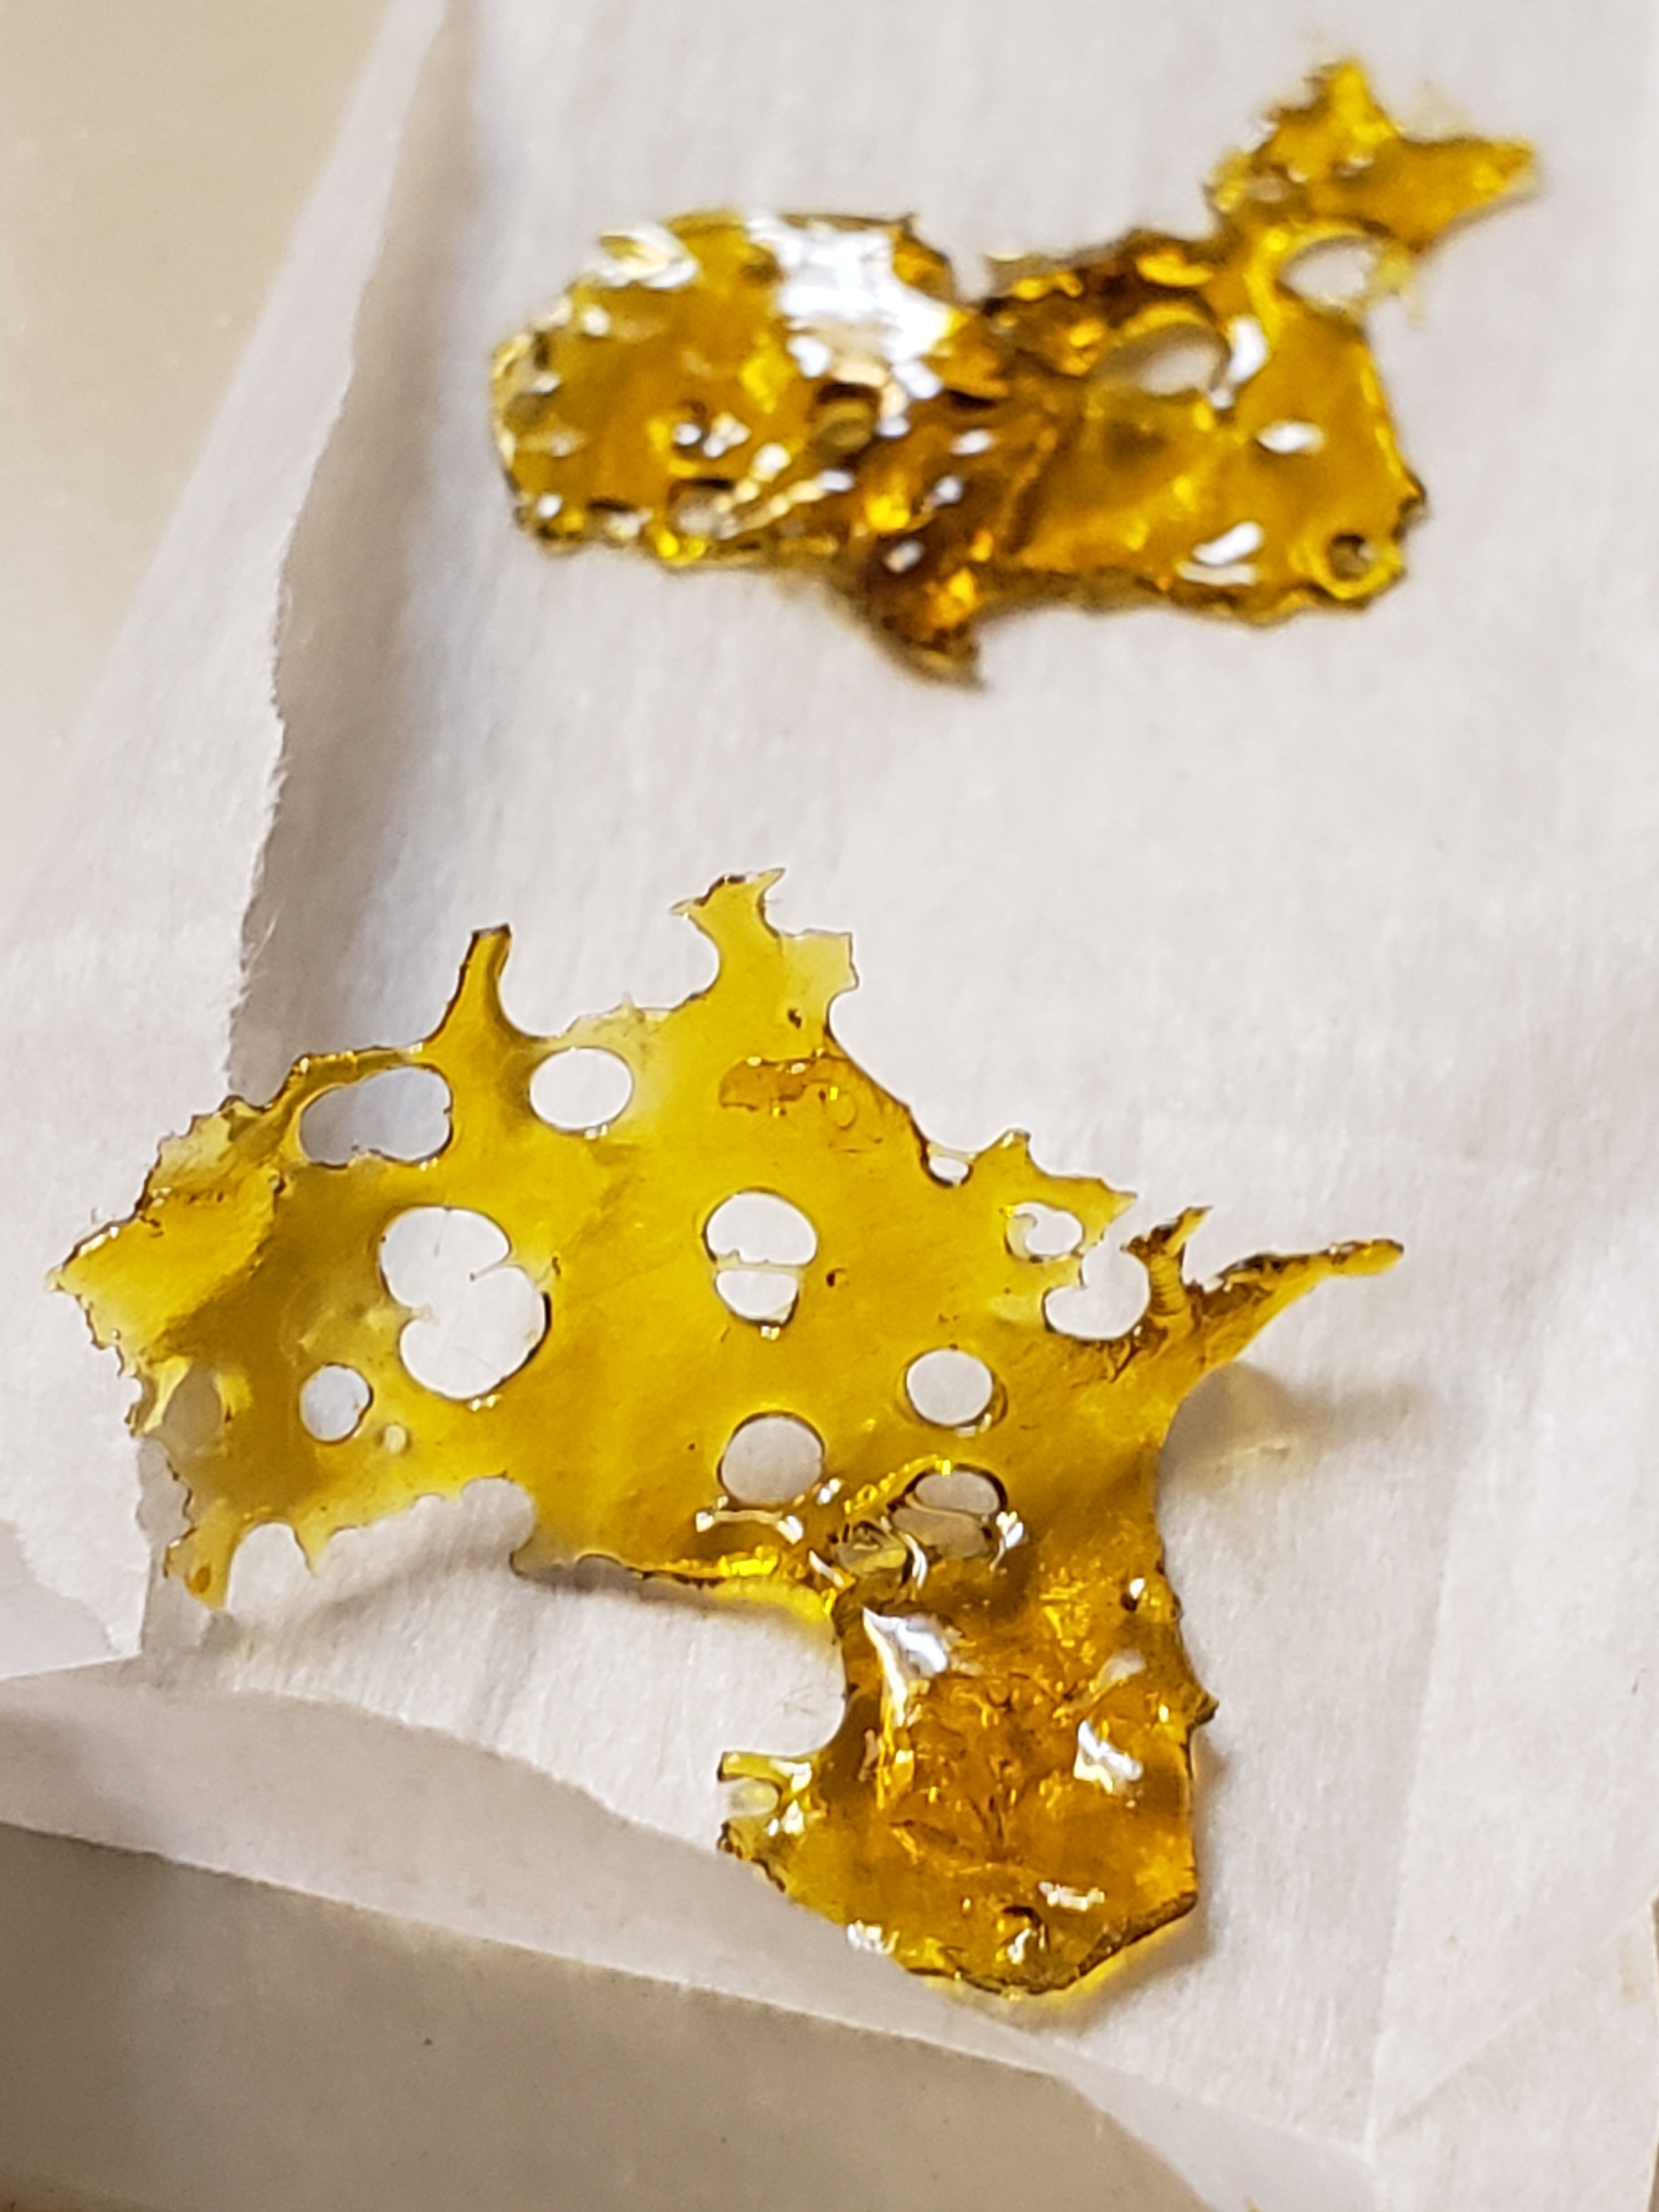 Top Quality WW Grade Pine Rosin / Resin / Colophony - Perfect For Food Wraps